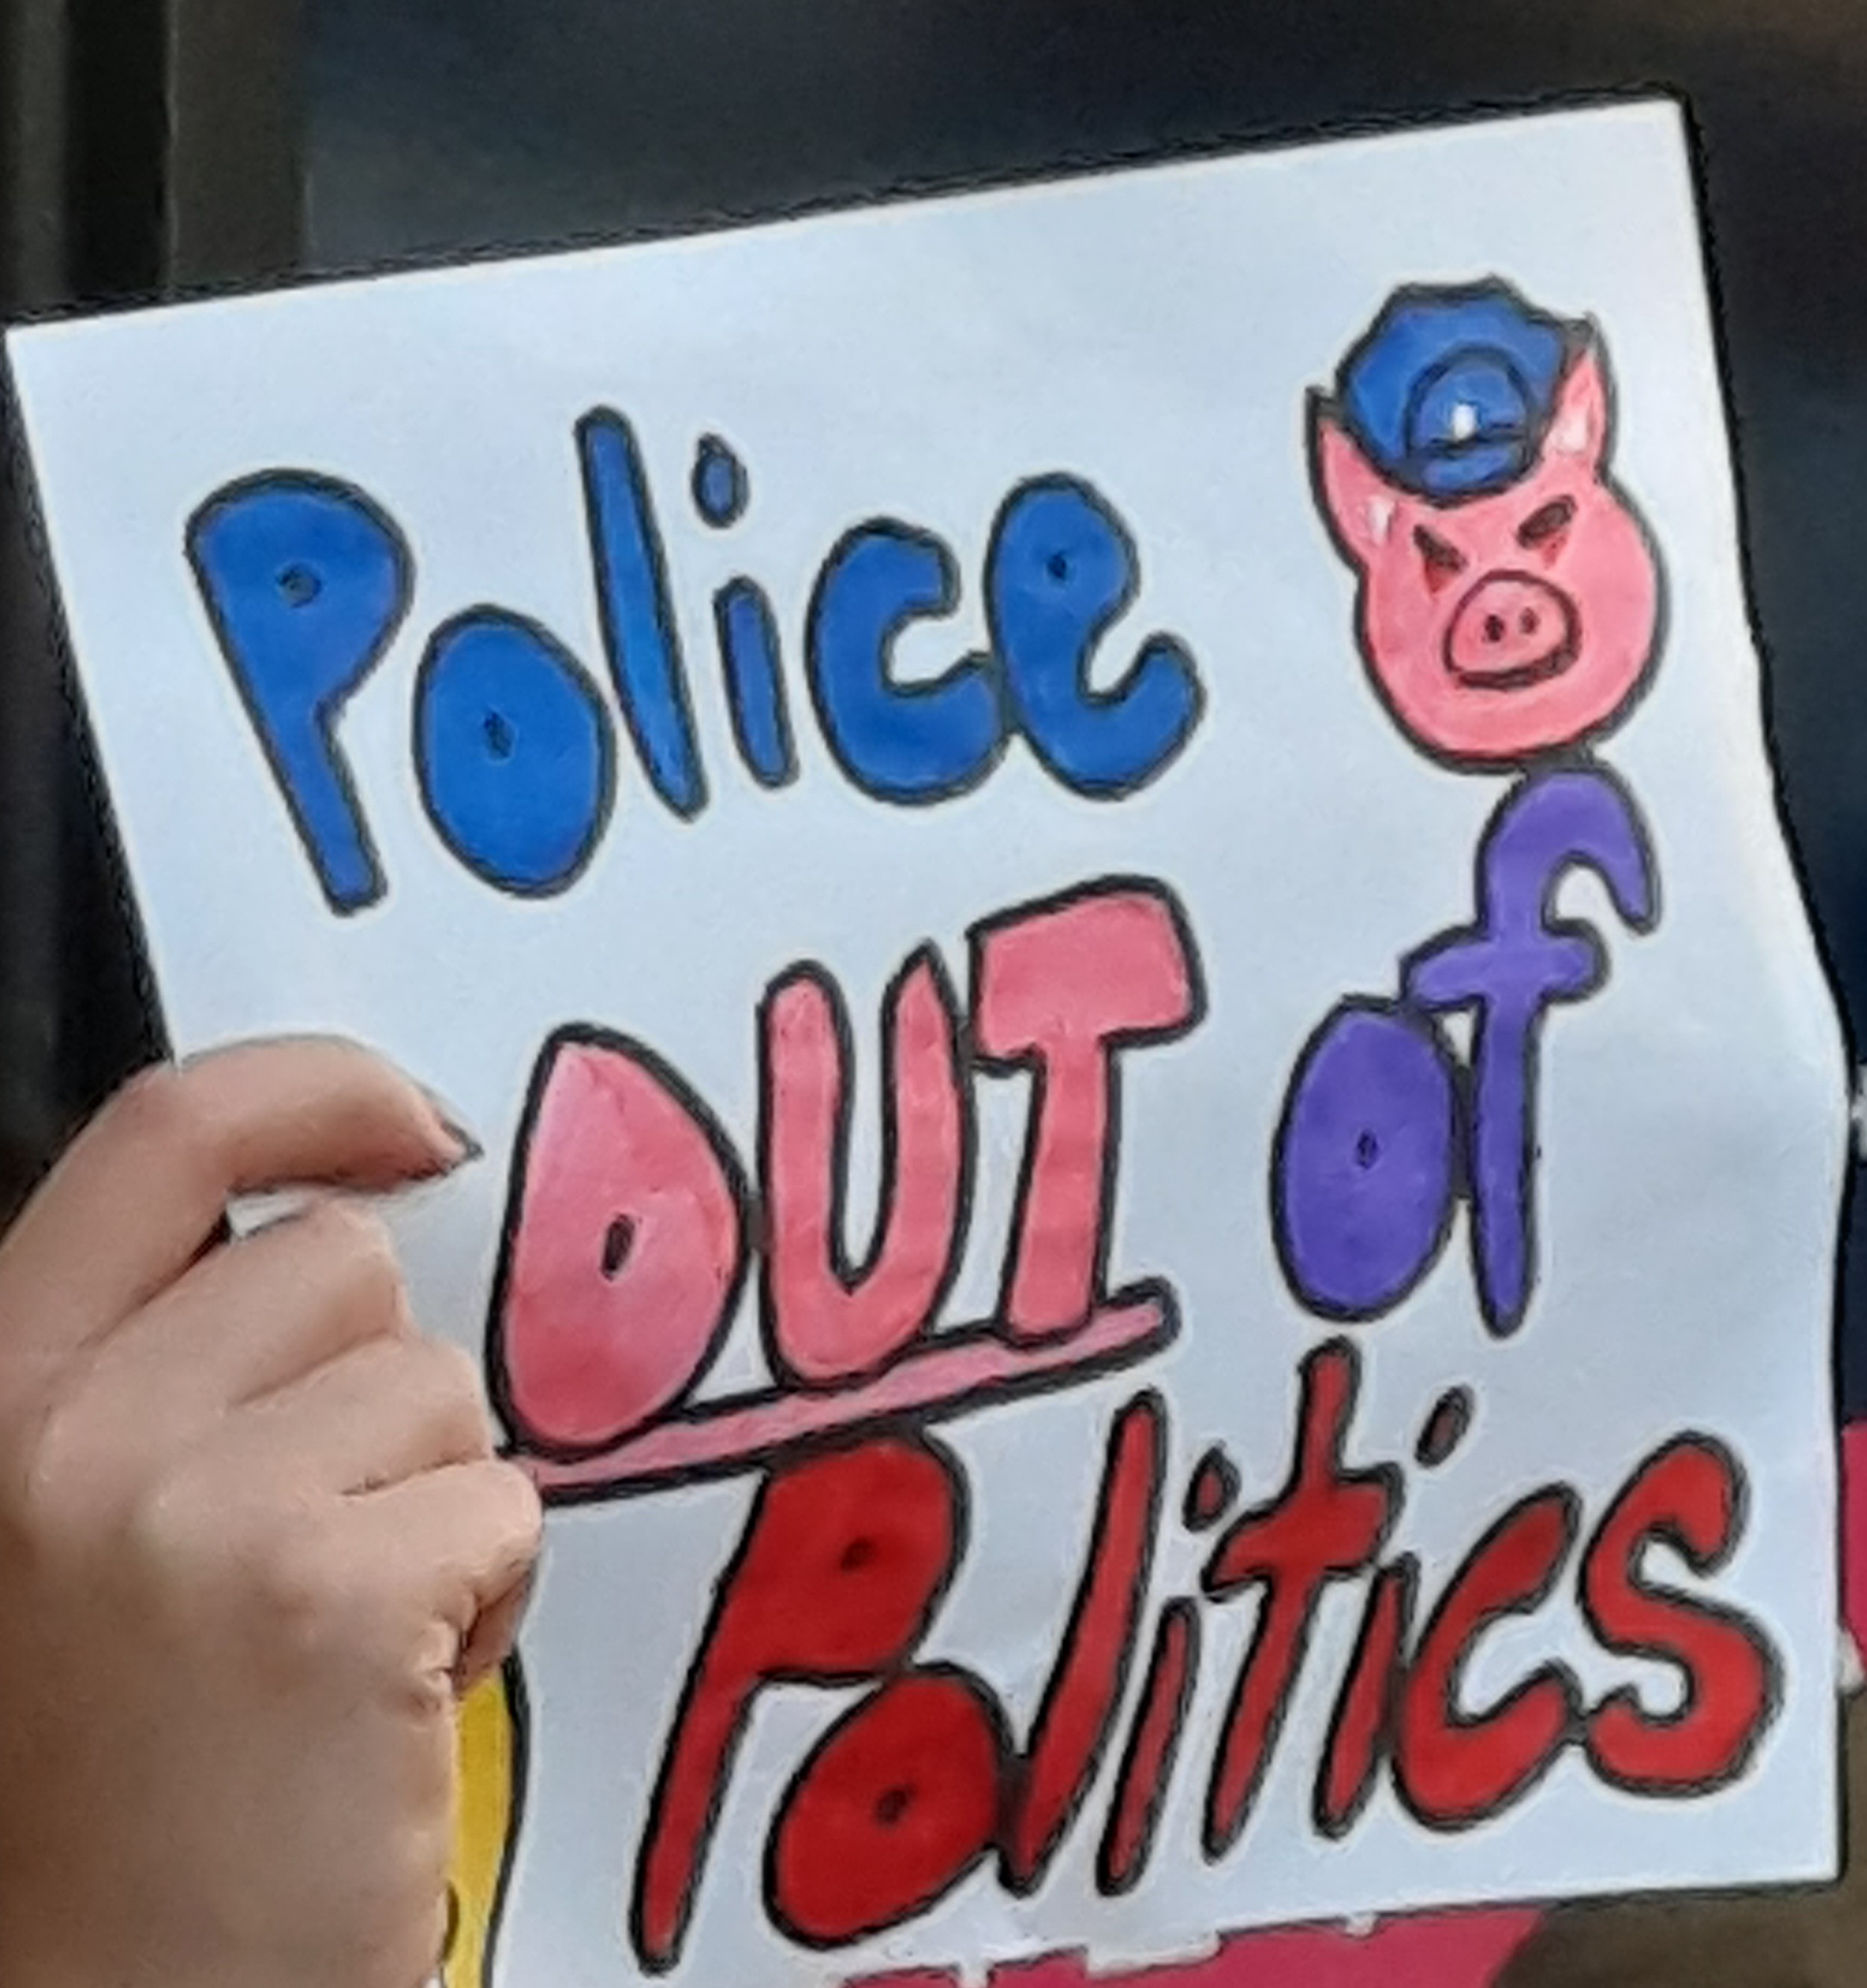 Poster being held saying Police Out of Politics. Image of a pig with a police hat.